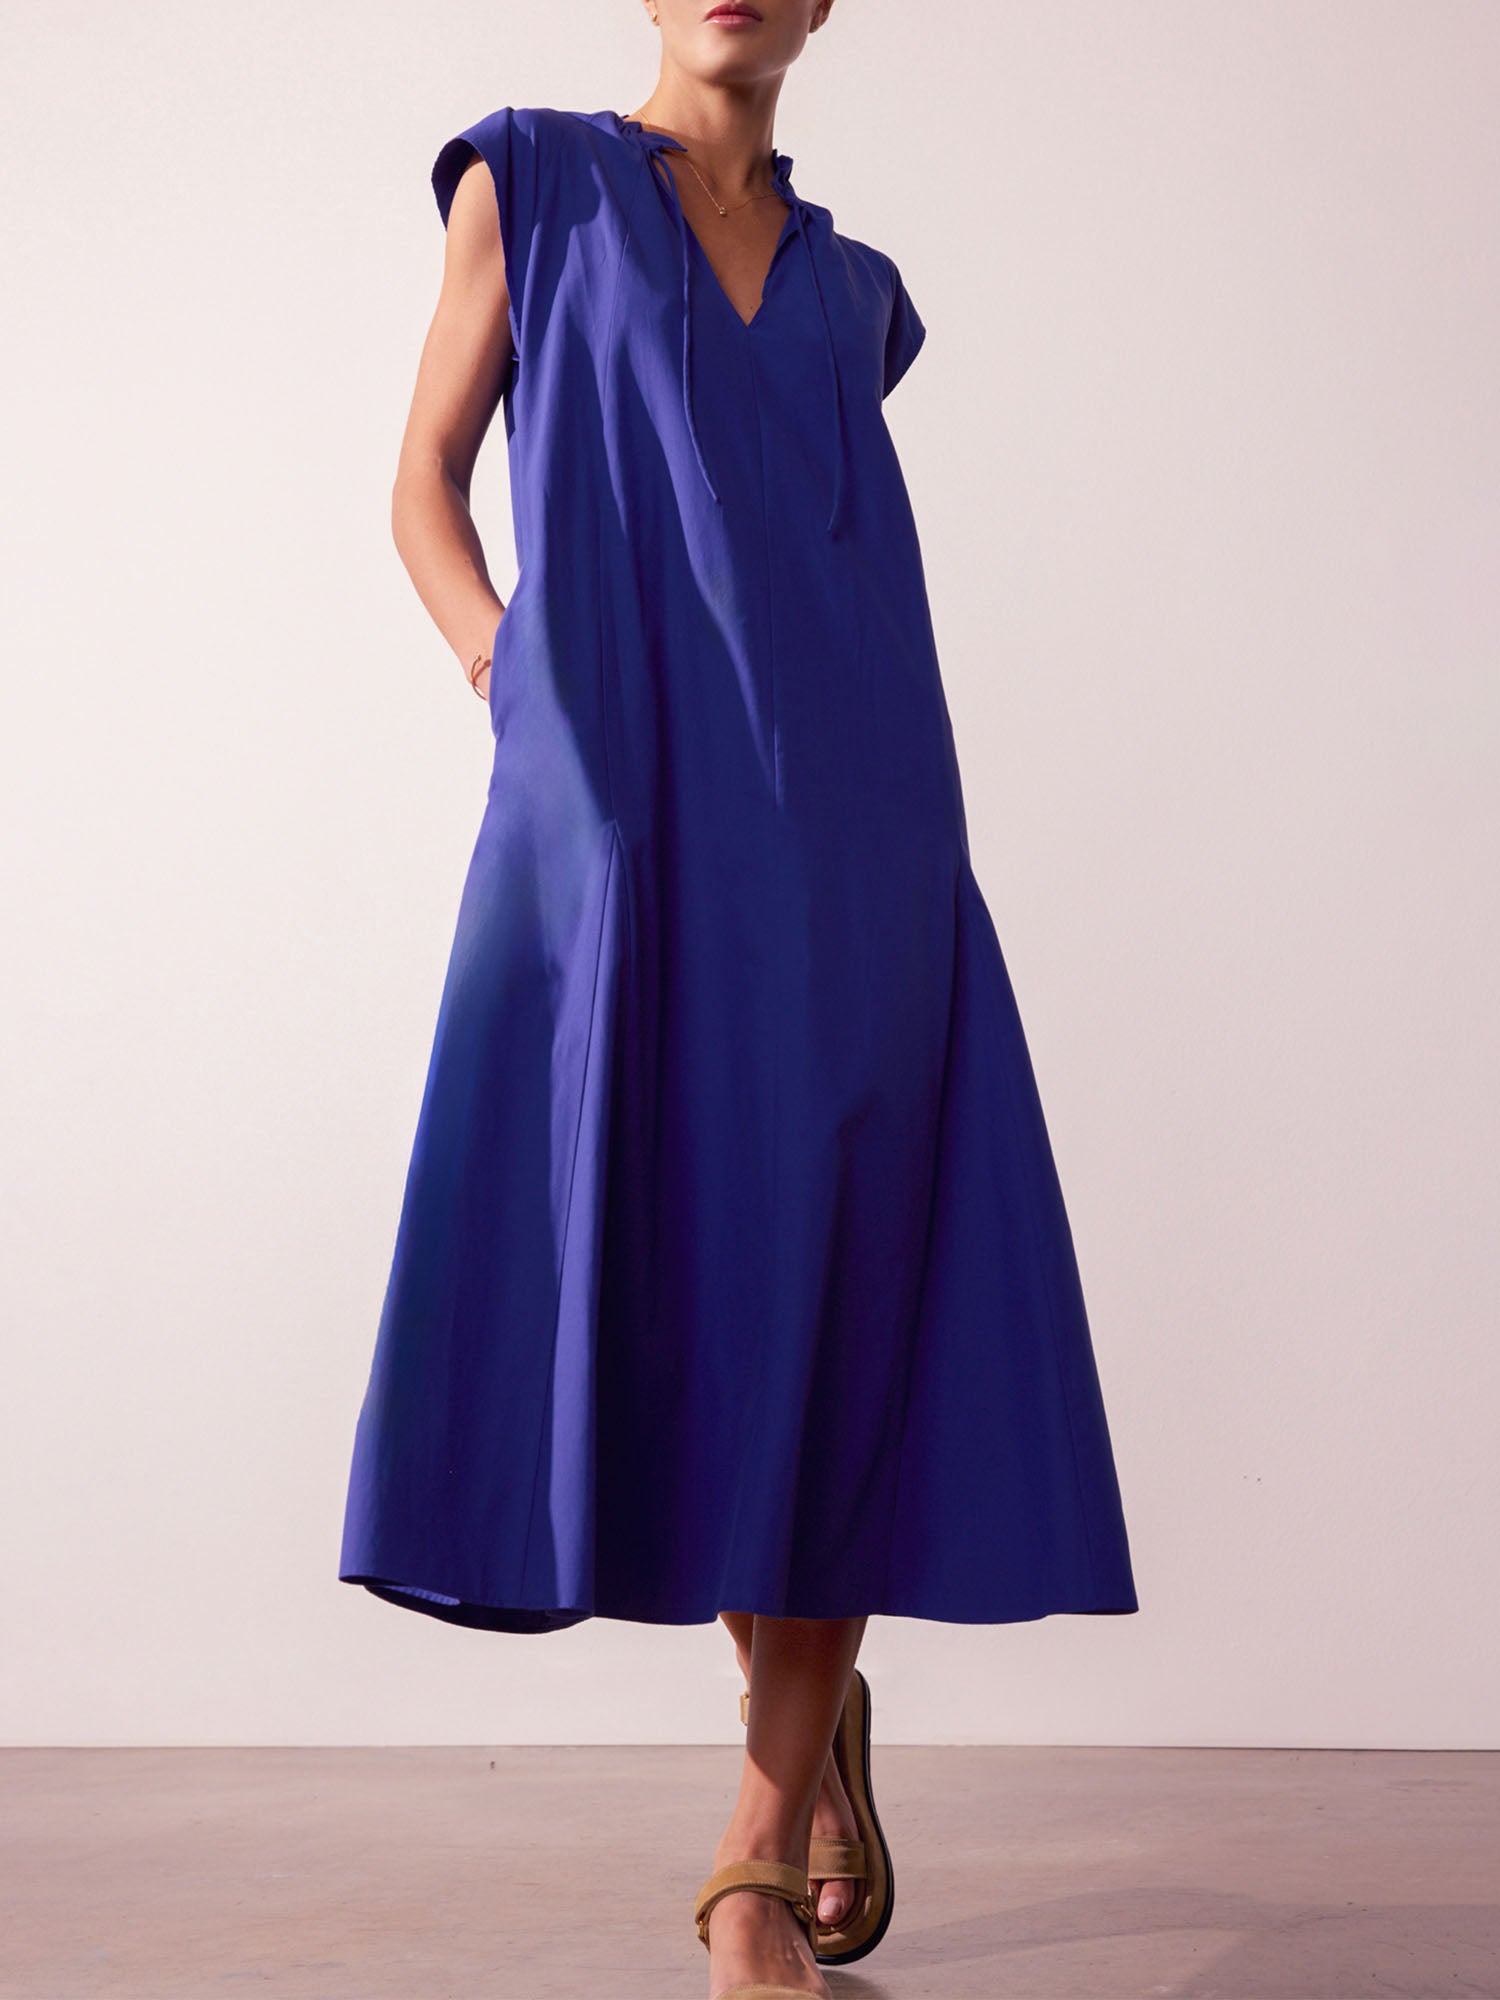 Newport ruffle belted blue midi dress front view 2